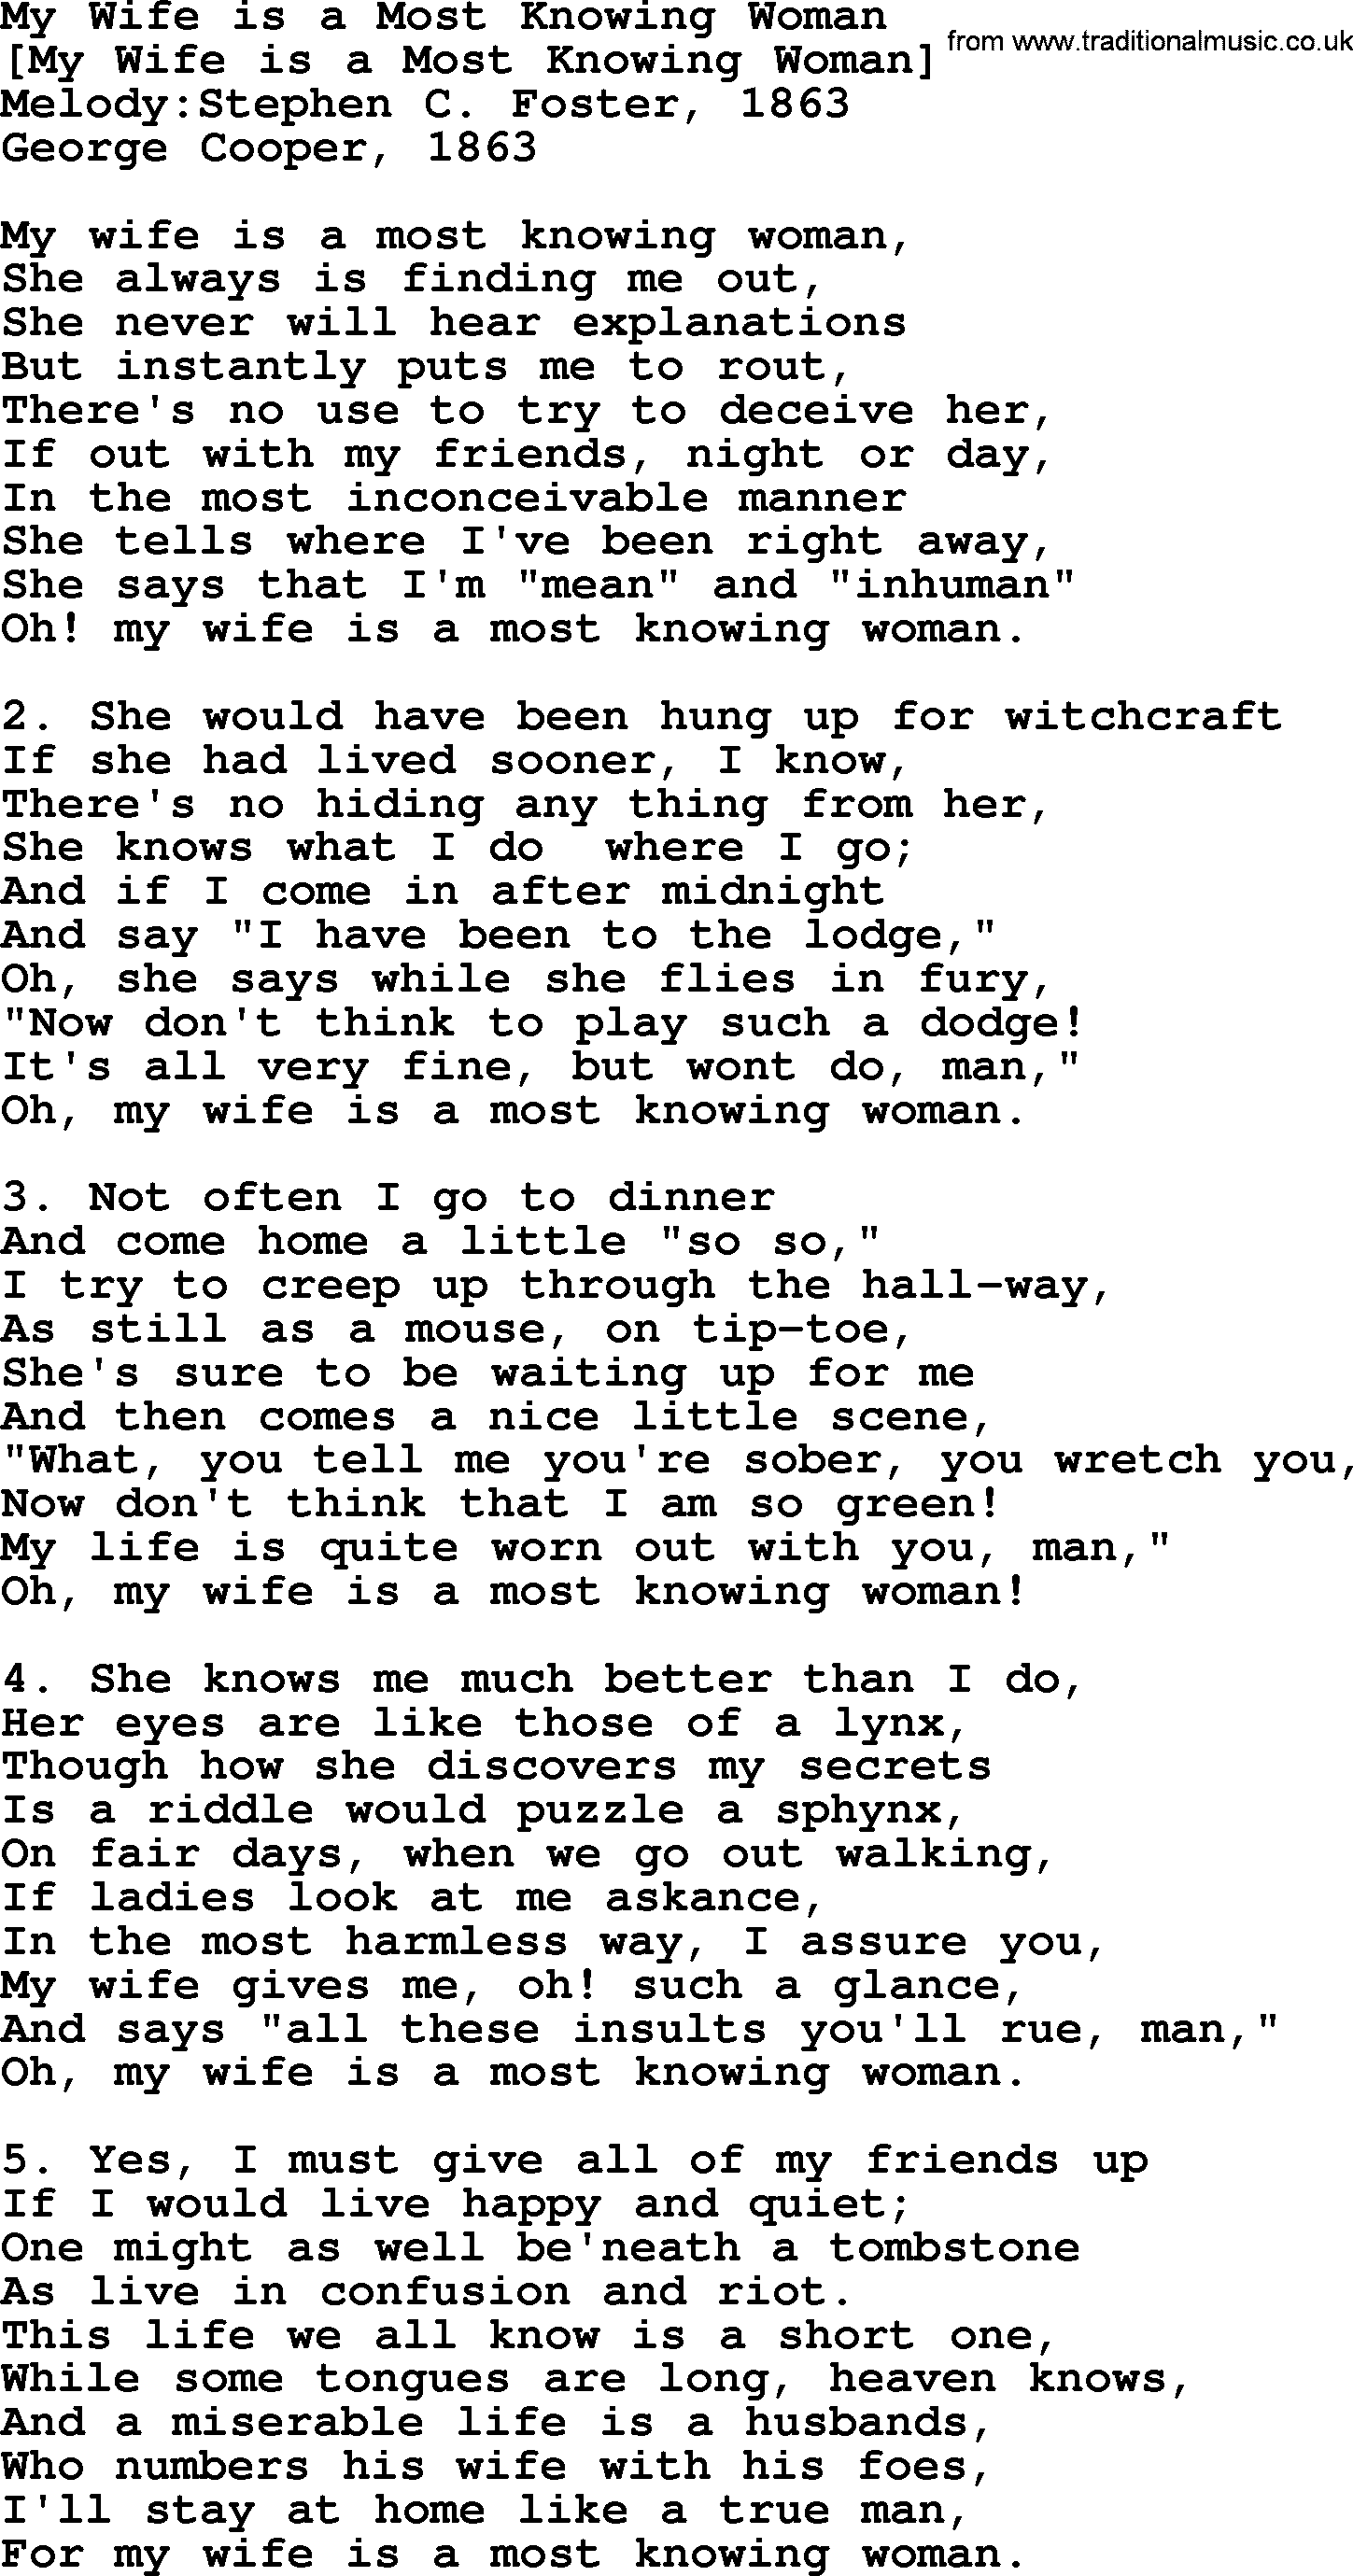 Old American Song: My Wife Is A Most Knowing Woman, lyrics